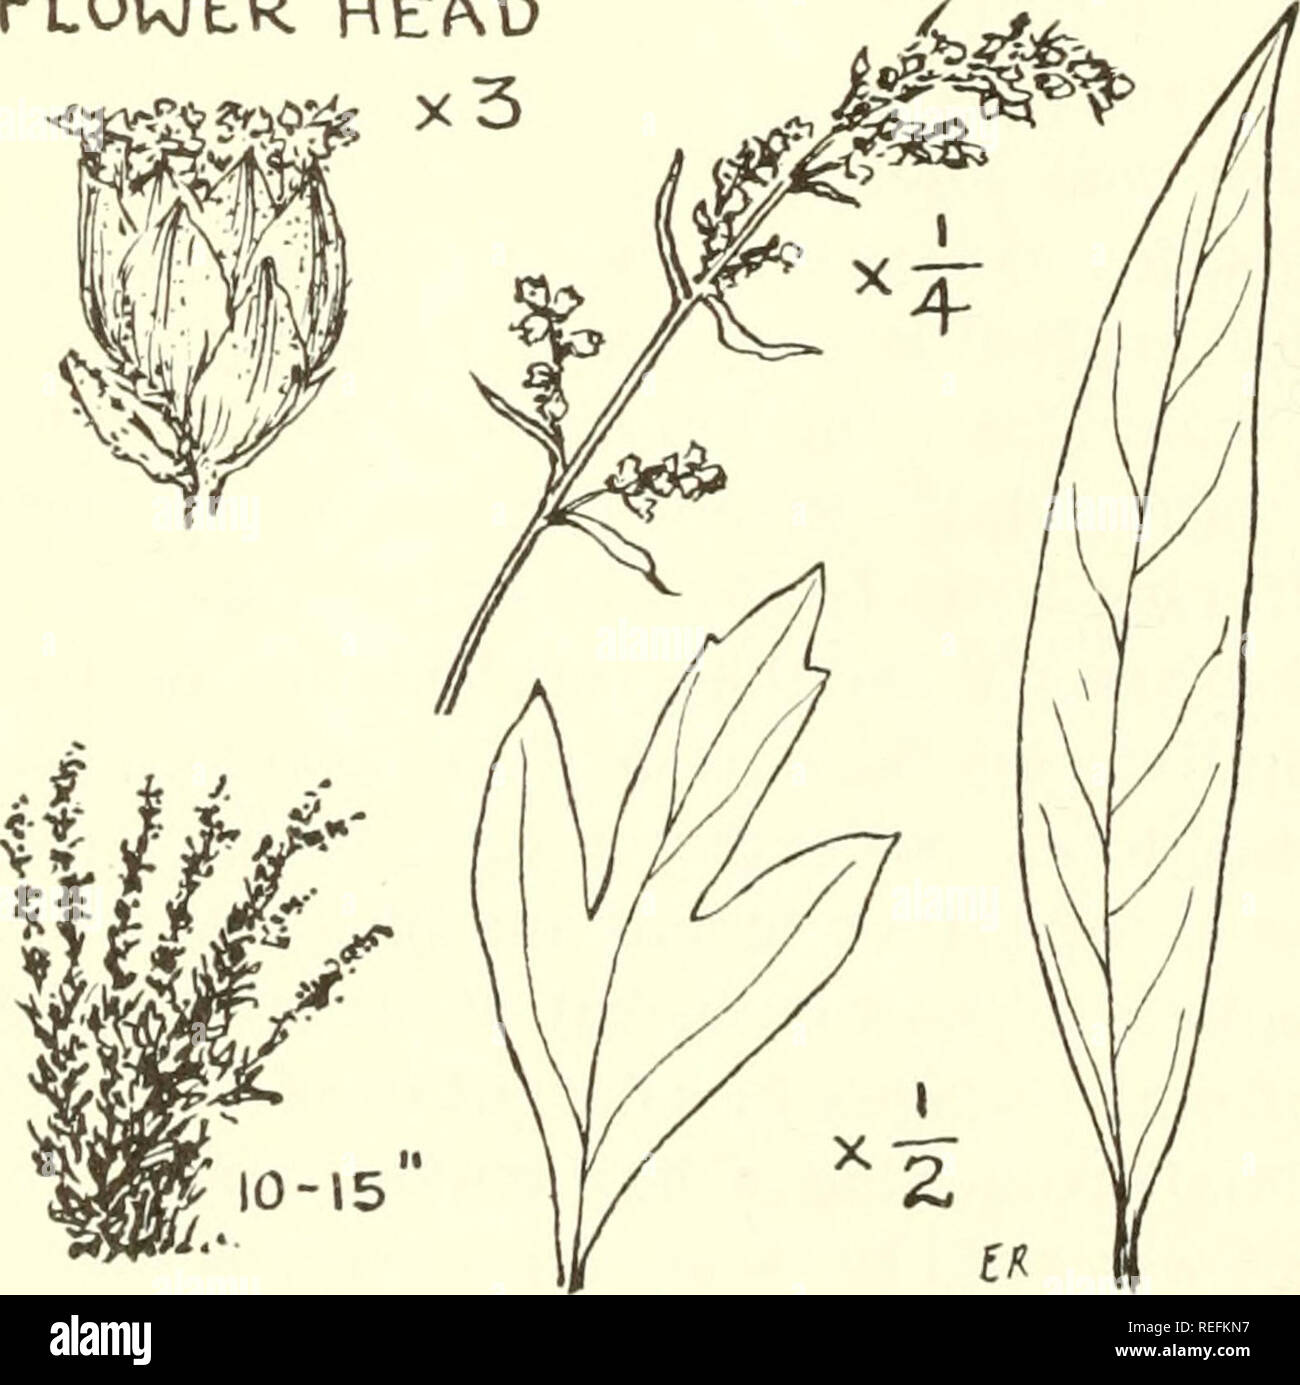 . Common edible and useful plants of the West. Plants, Edible -- West (U. S. ); Botany, Economic; Botany -- West (U. S. ). H-56. WESTERN MUGWORT, FLOWER HEAD x3 Sage MCF Grass Oak Most States W. Can.. Artemisia ludoviciana. Slen- der to moderately stout herb, l'-5' tall; small, yellow to purplish and hairy flowers, in dense spikes; numerous leaves are densely white woolly; generally in shady spots. Dioscorides says: &quot;Dissolves gallstones. Juice made with myrrh works with same effect as do the roots; also being made up with axungia (hog or goose grease) into an ointment, takes away wens an Stock Photo